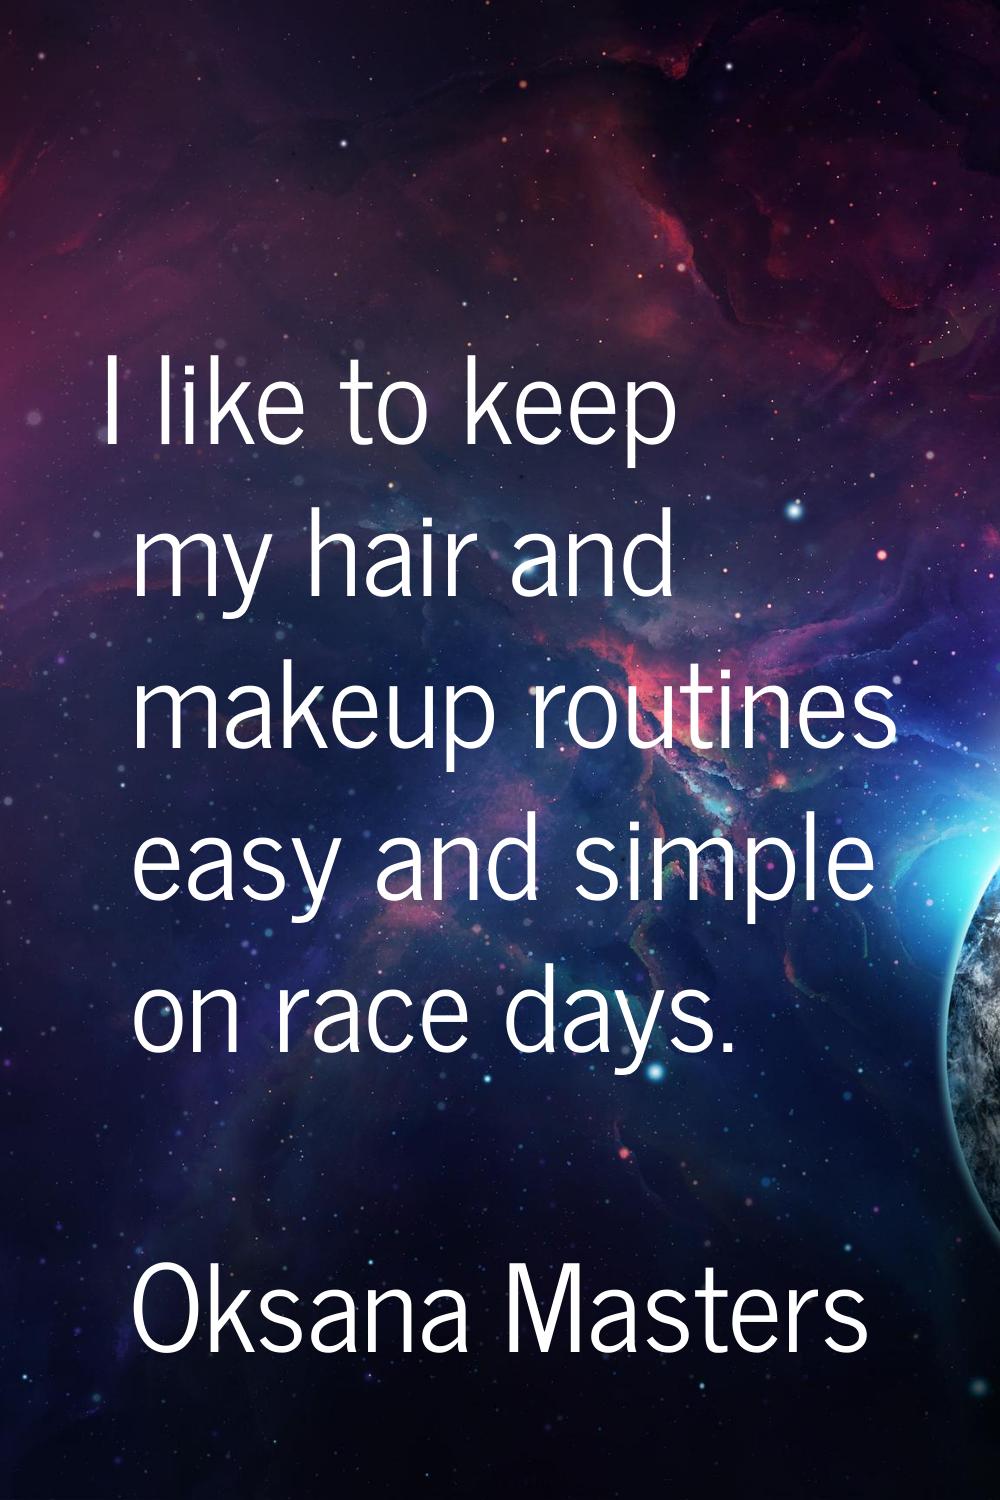 I like to keep my hair and makeup routines easy and simple on race days.